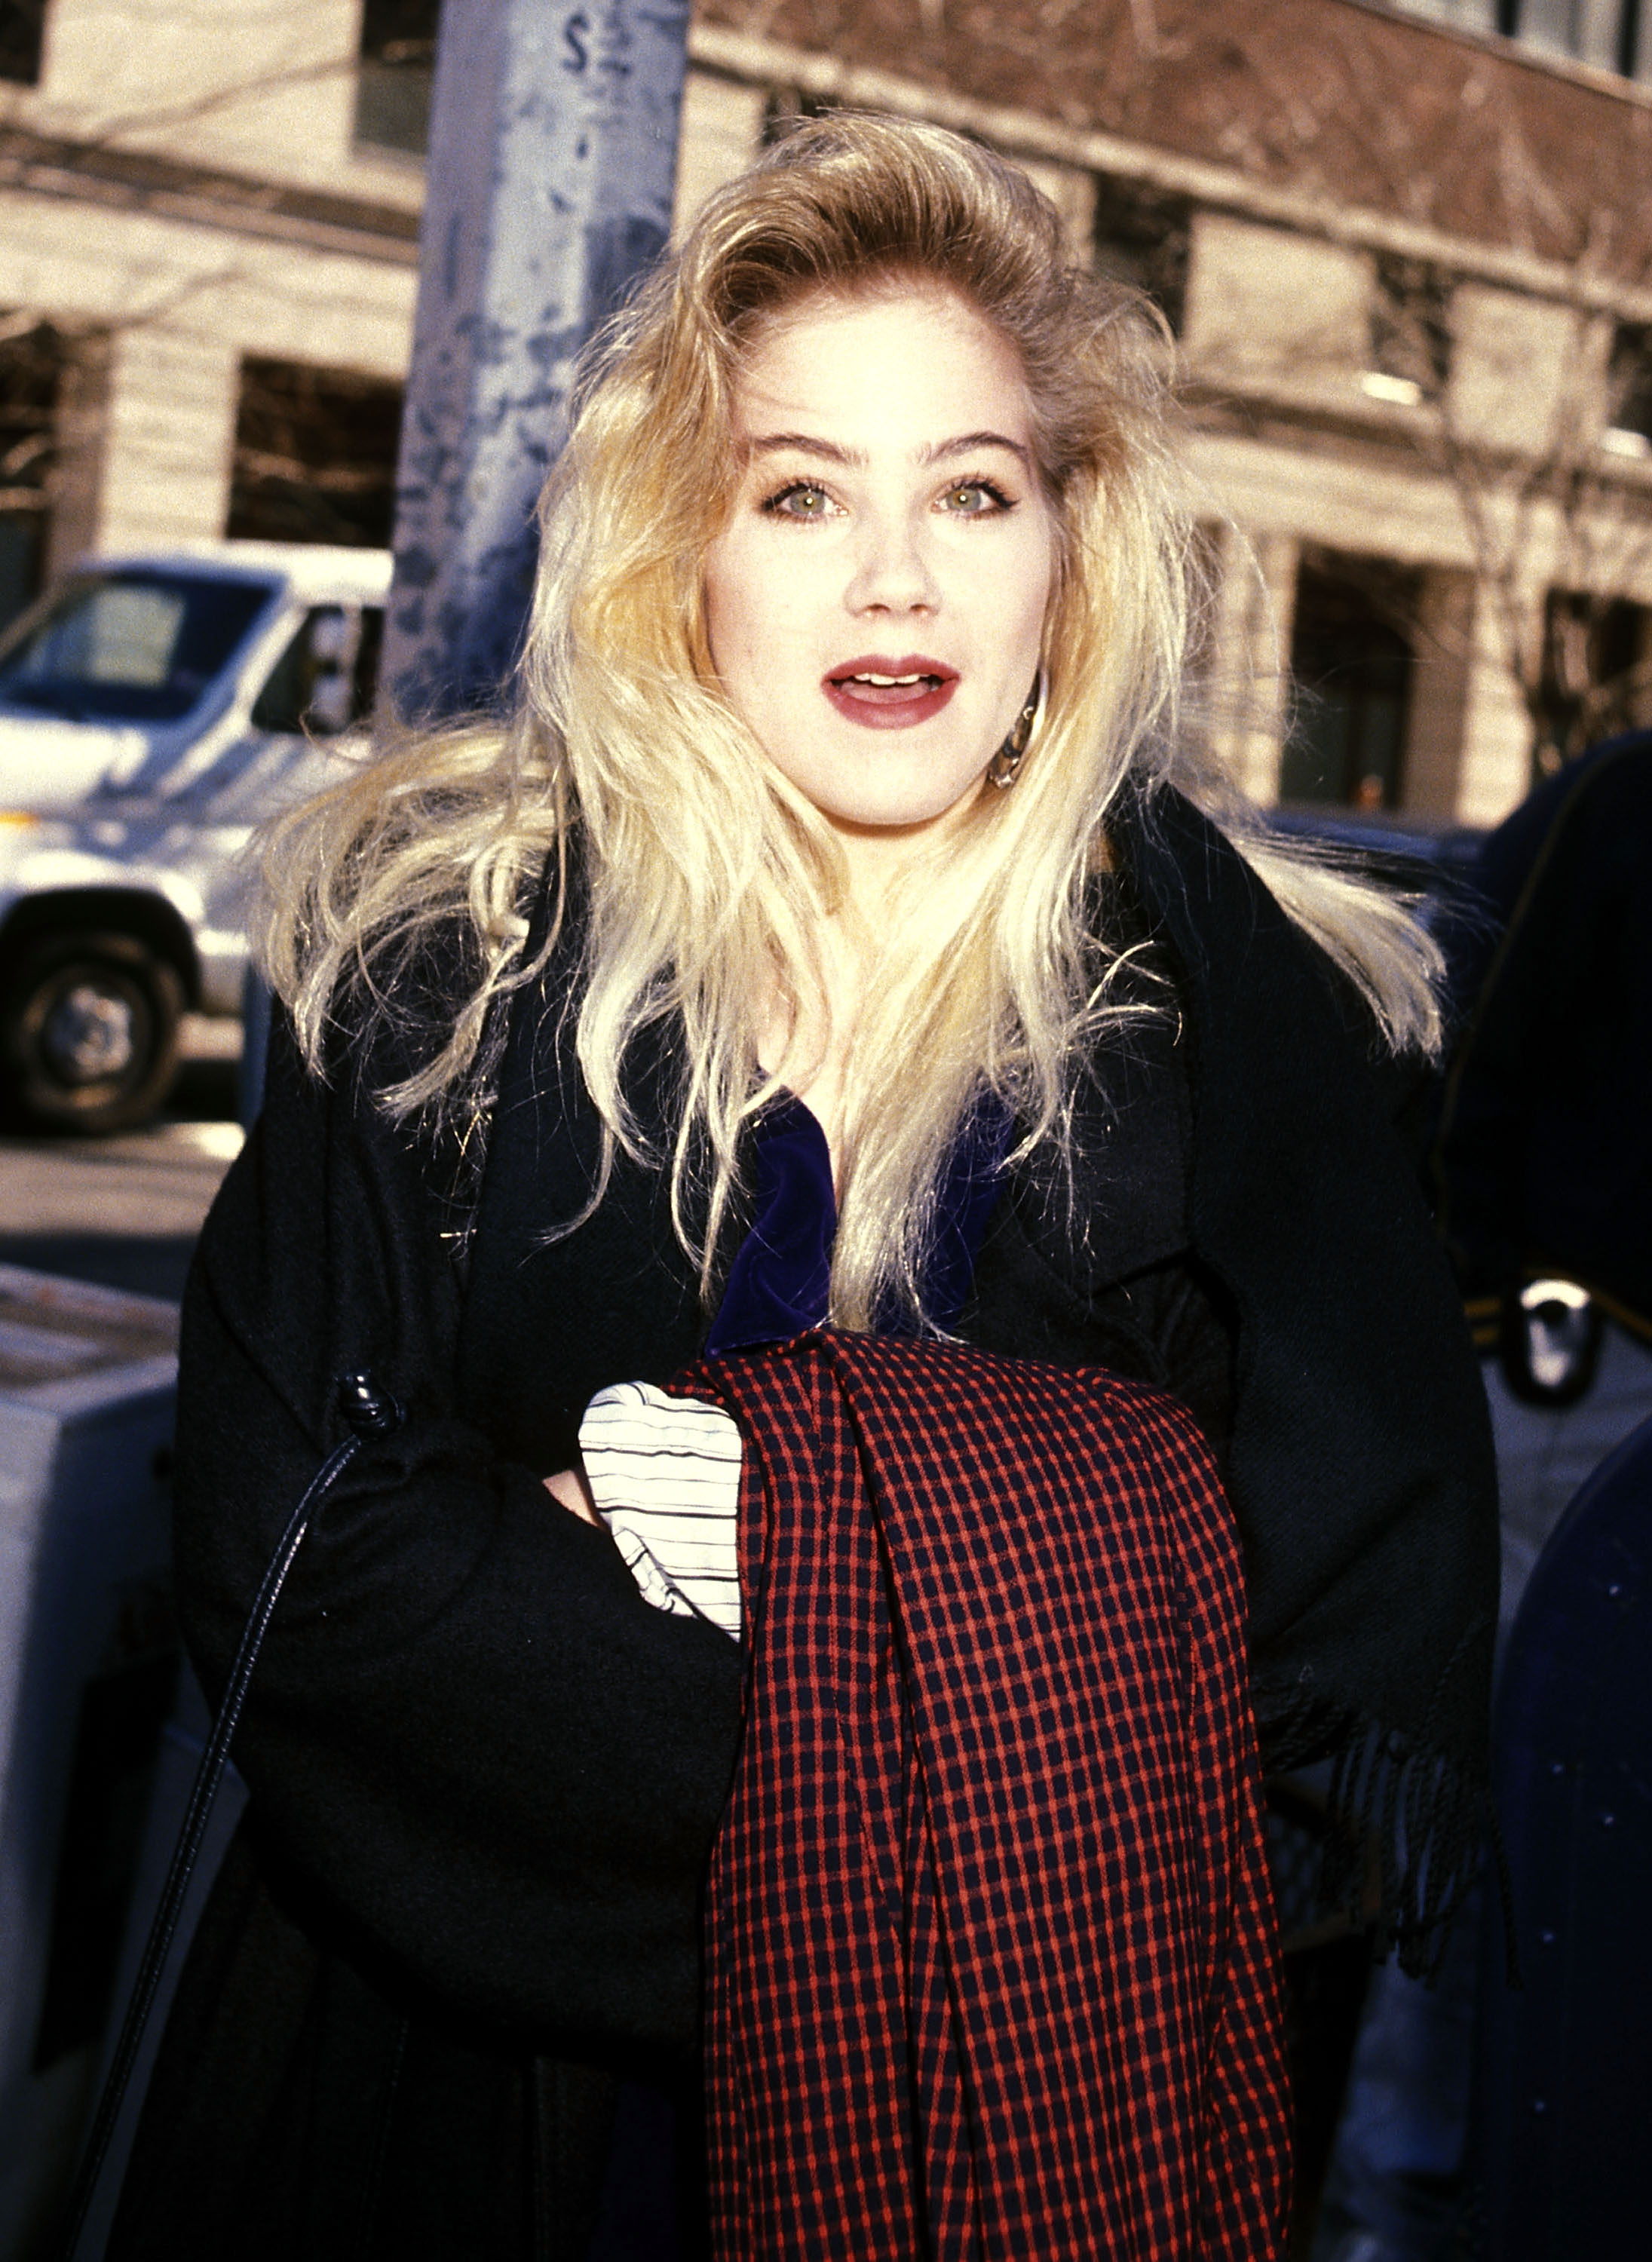 Christina Applegate visits "Live with Regis and Kathie Lee" on March 22, 1989 in New York City | Source: Getty Images